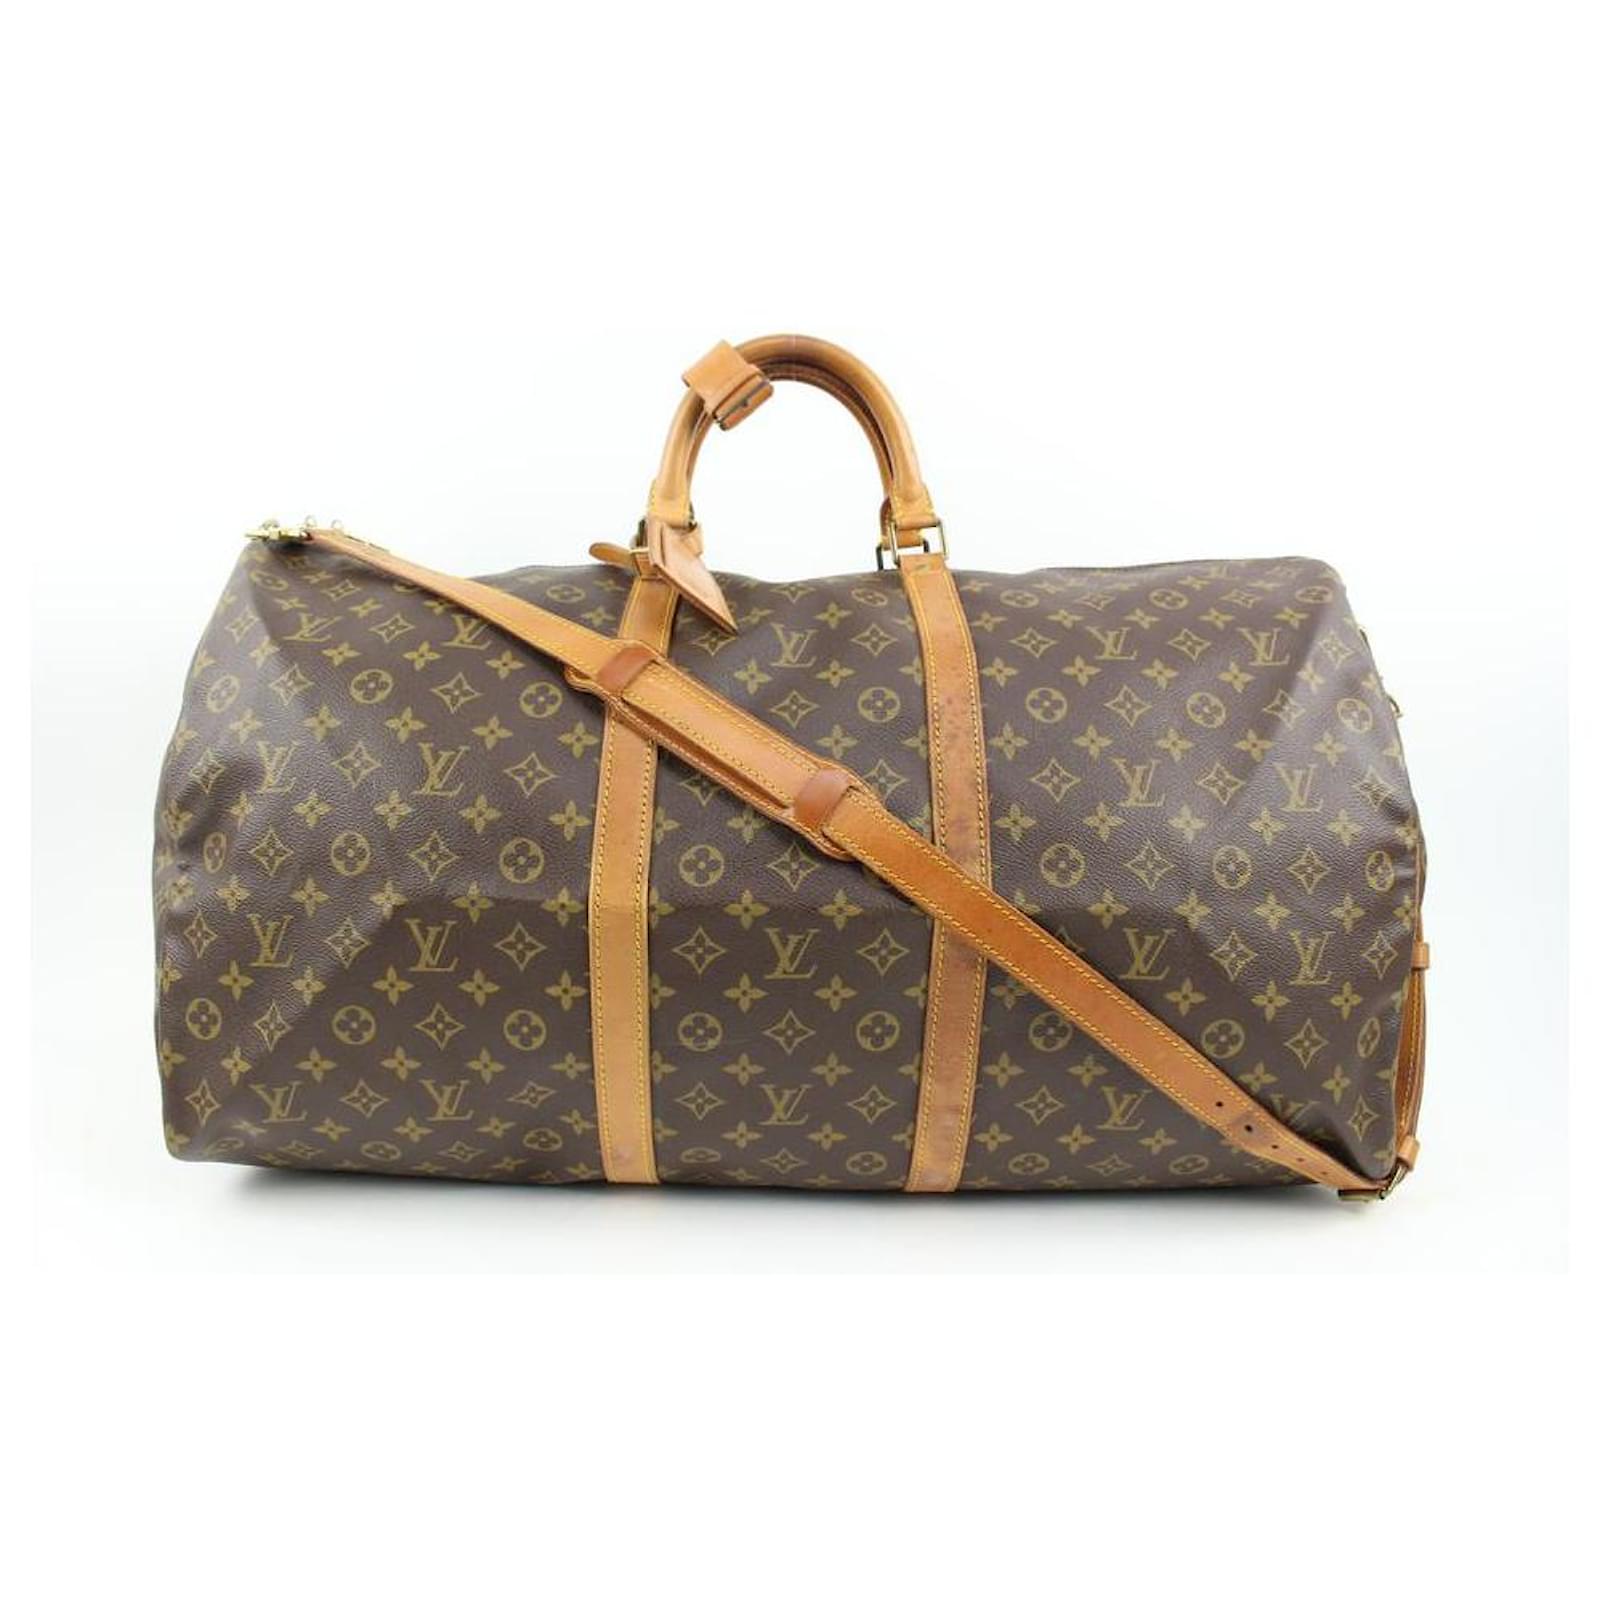 Louis Vuitton Monogram Keepall Bandouliere 60 Duffle Bag with Strap 60lv218s